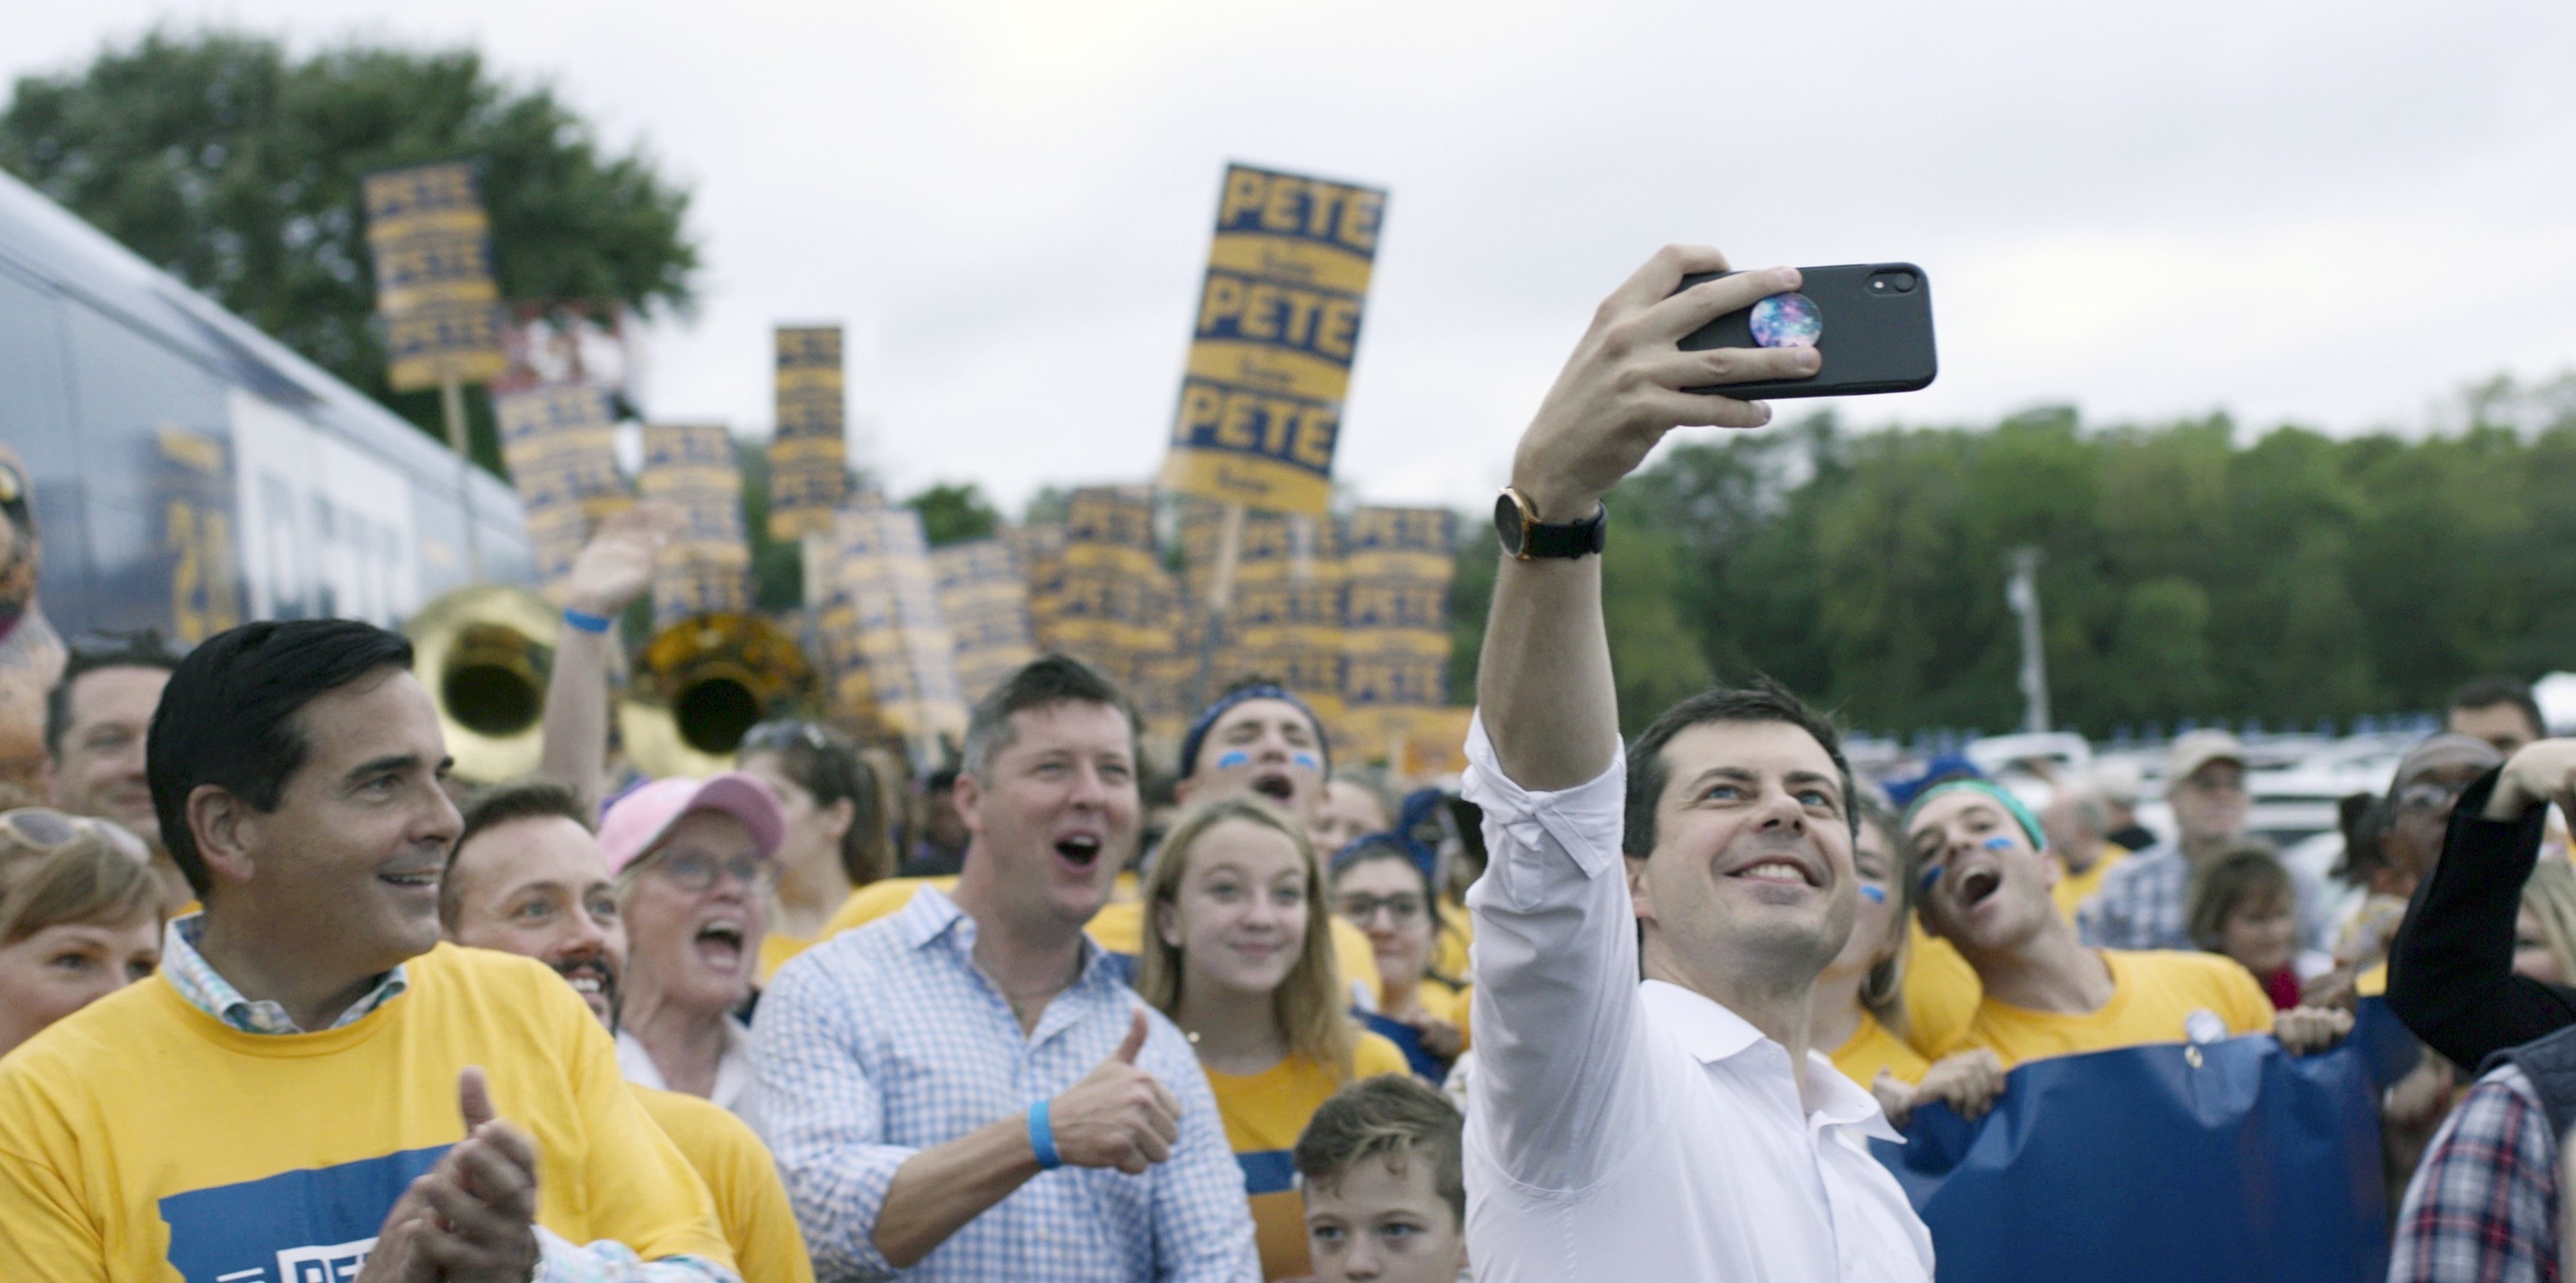 Pete Buttigieg takes a selfie with supporters